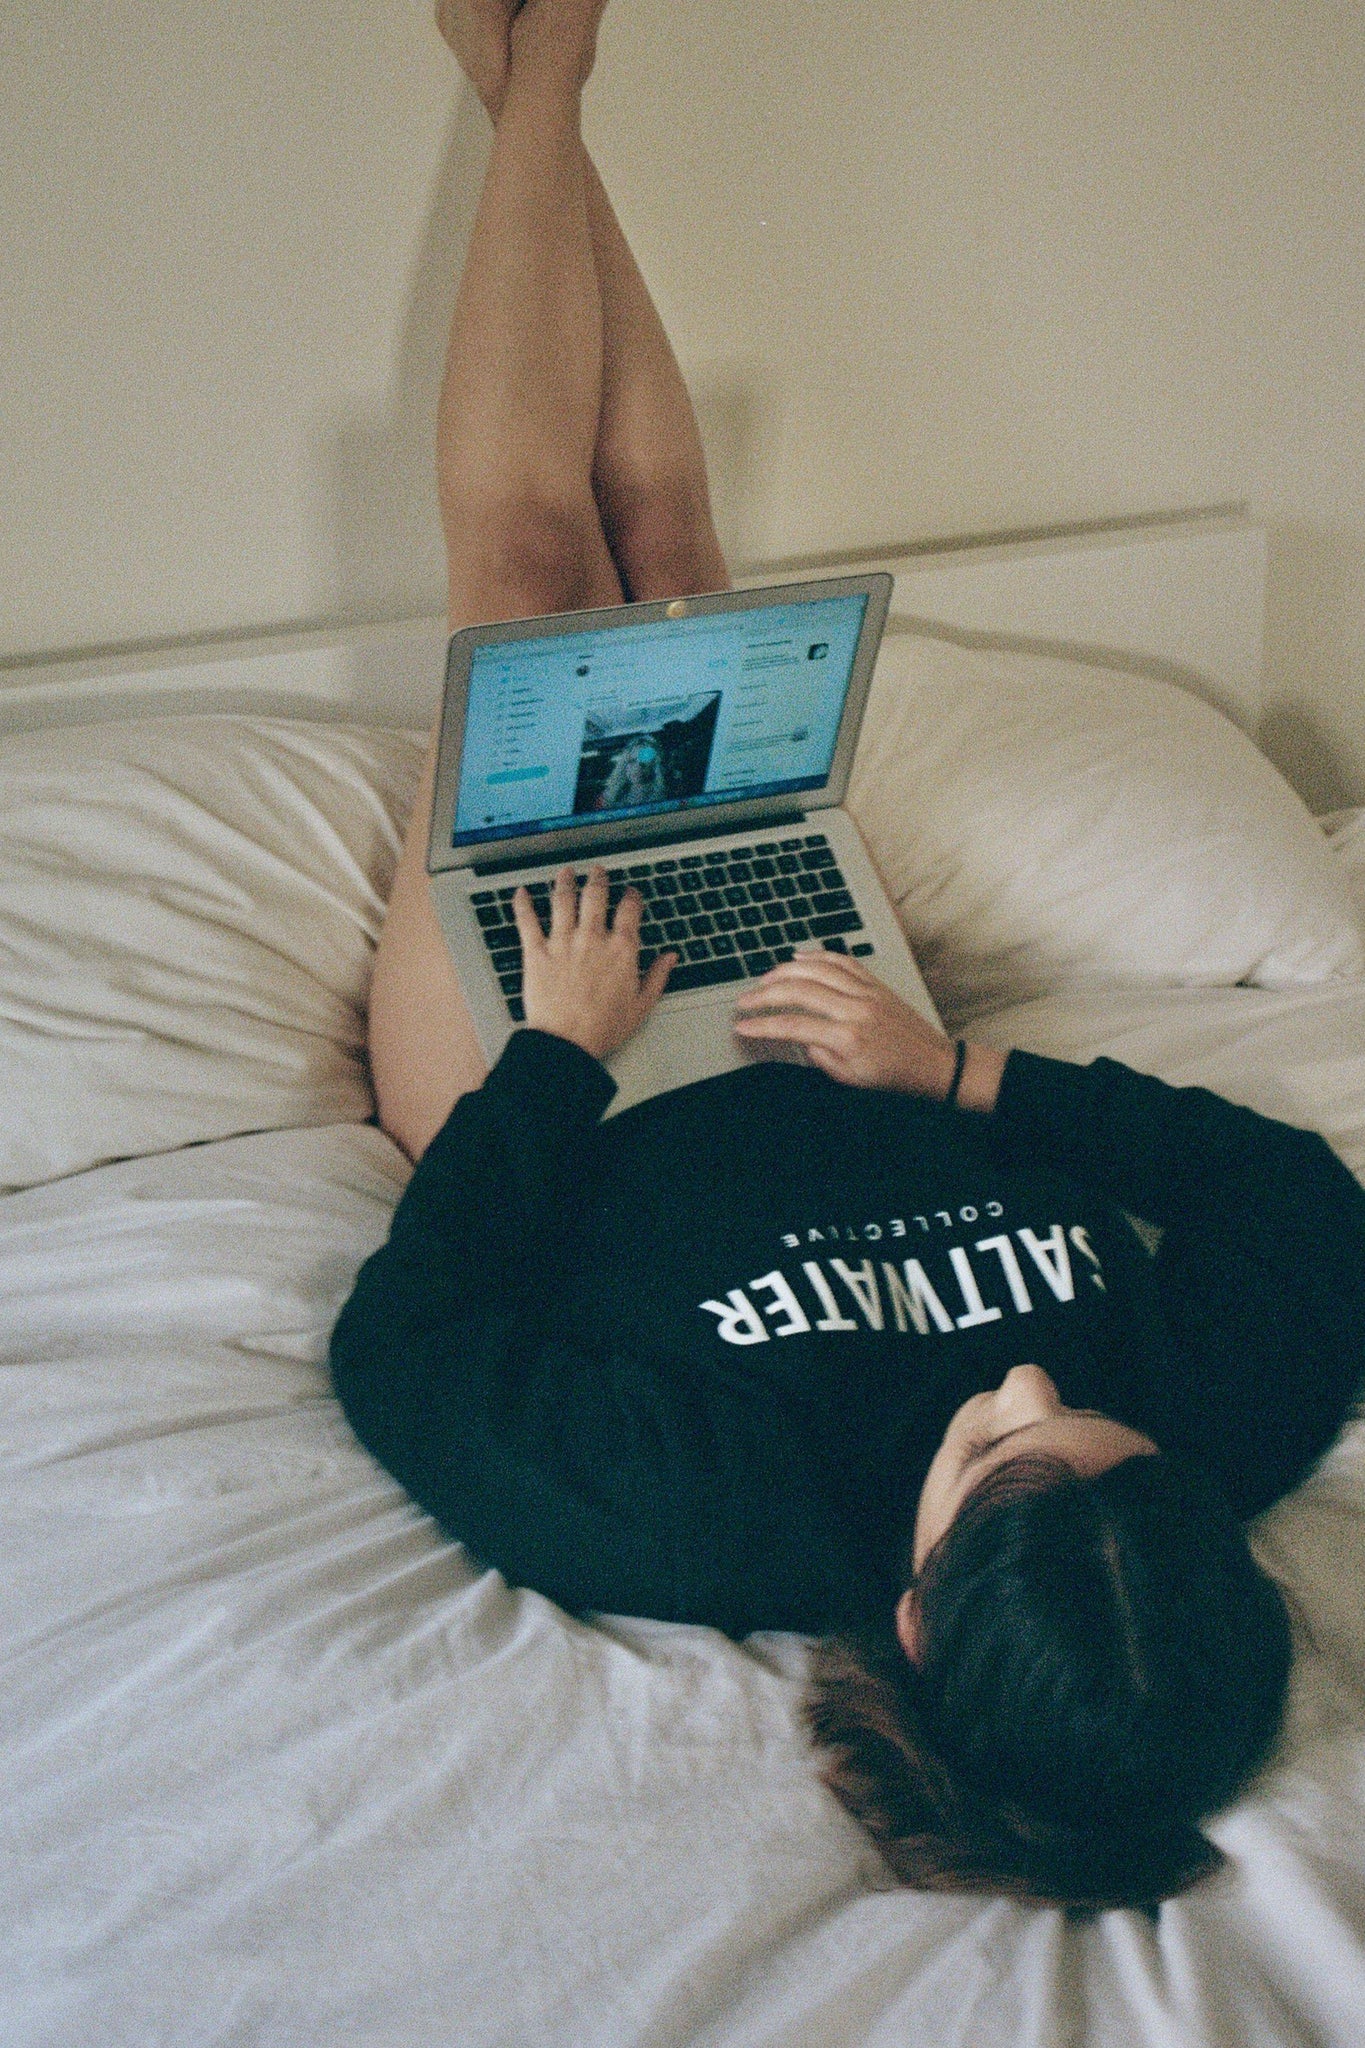 A woman laying on a bed with her legs leaned up against the wall wearing a black crewneck sweatshirt.